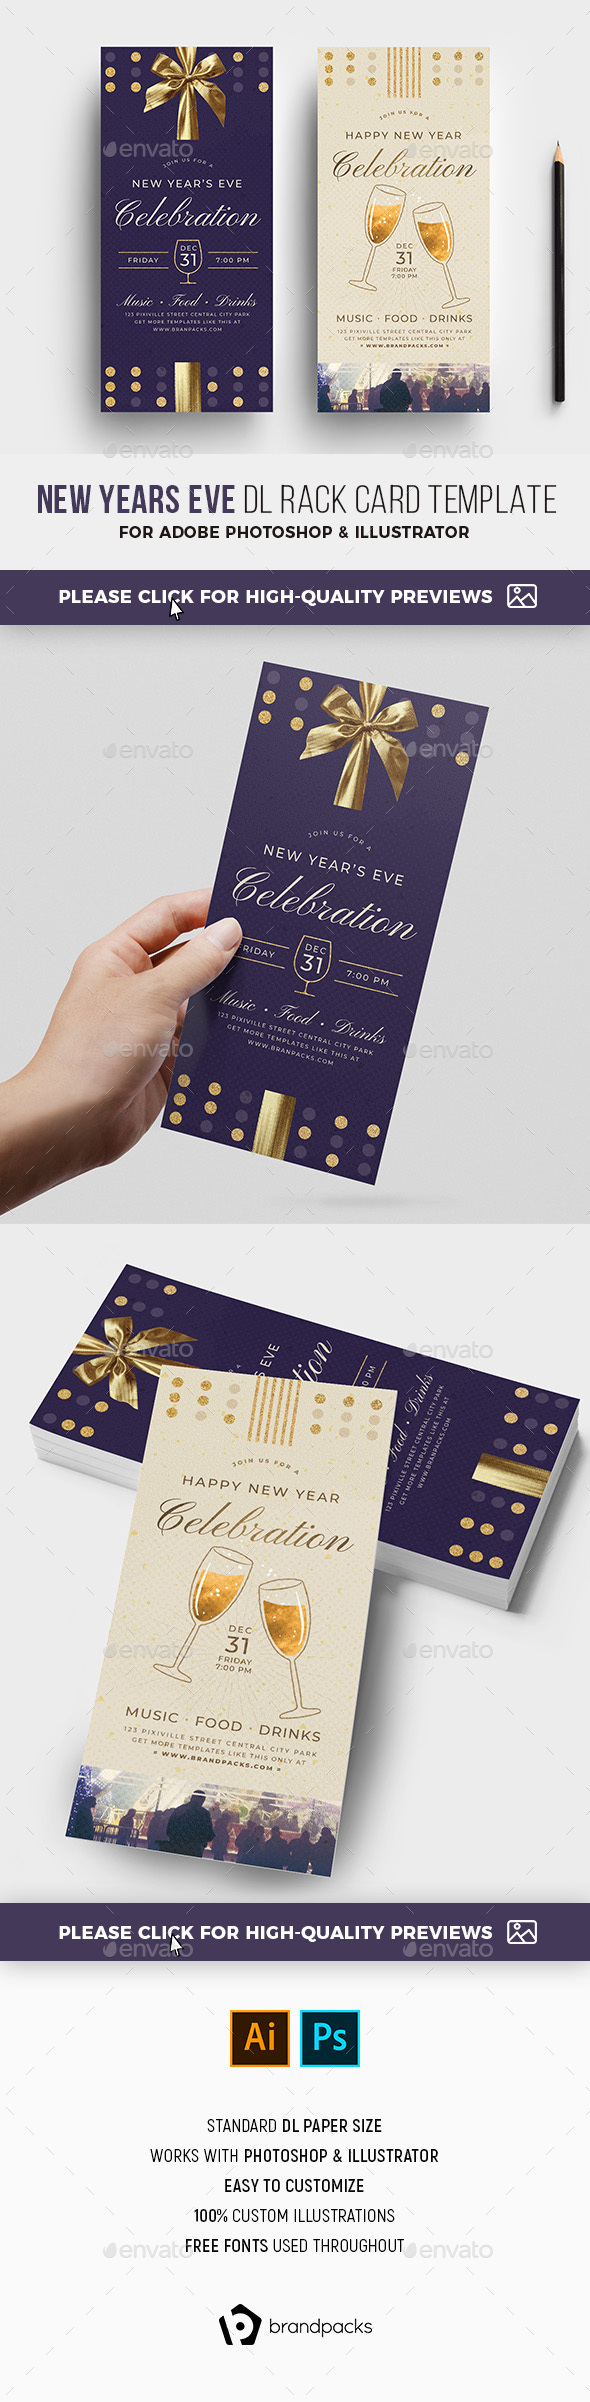 New Year's Eve DL Card